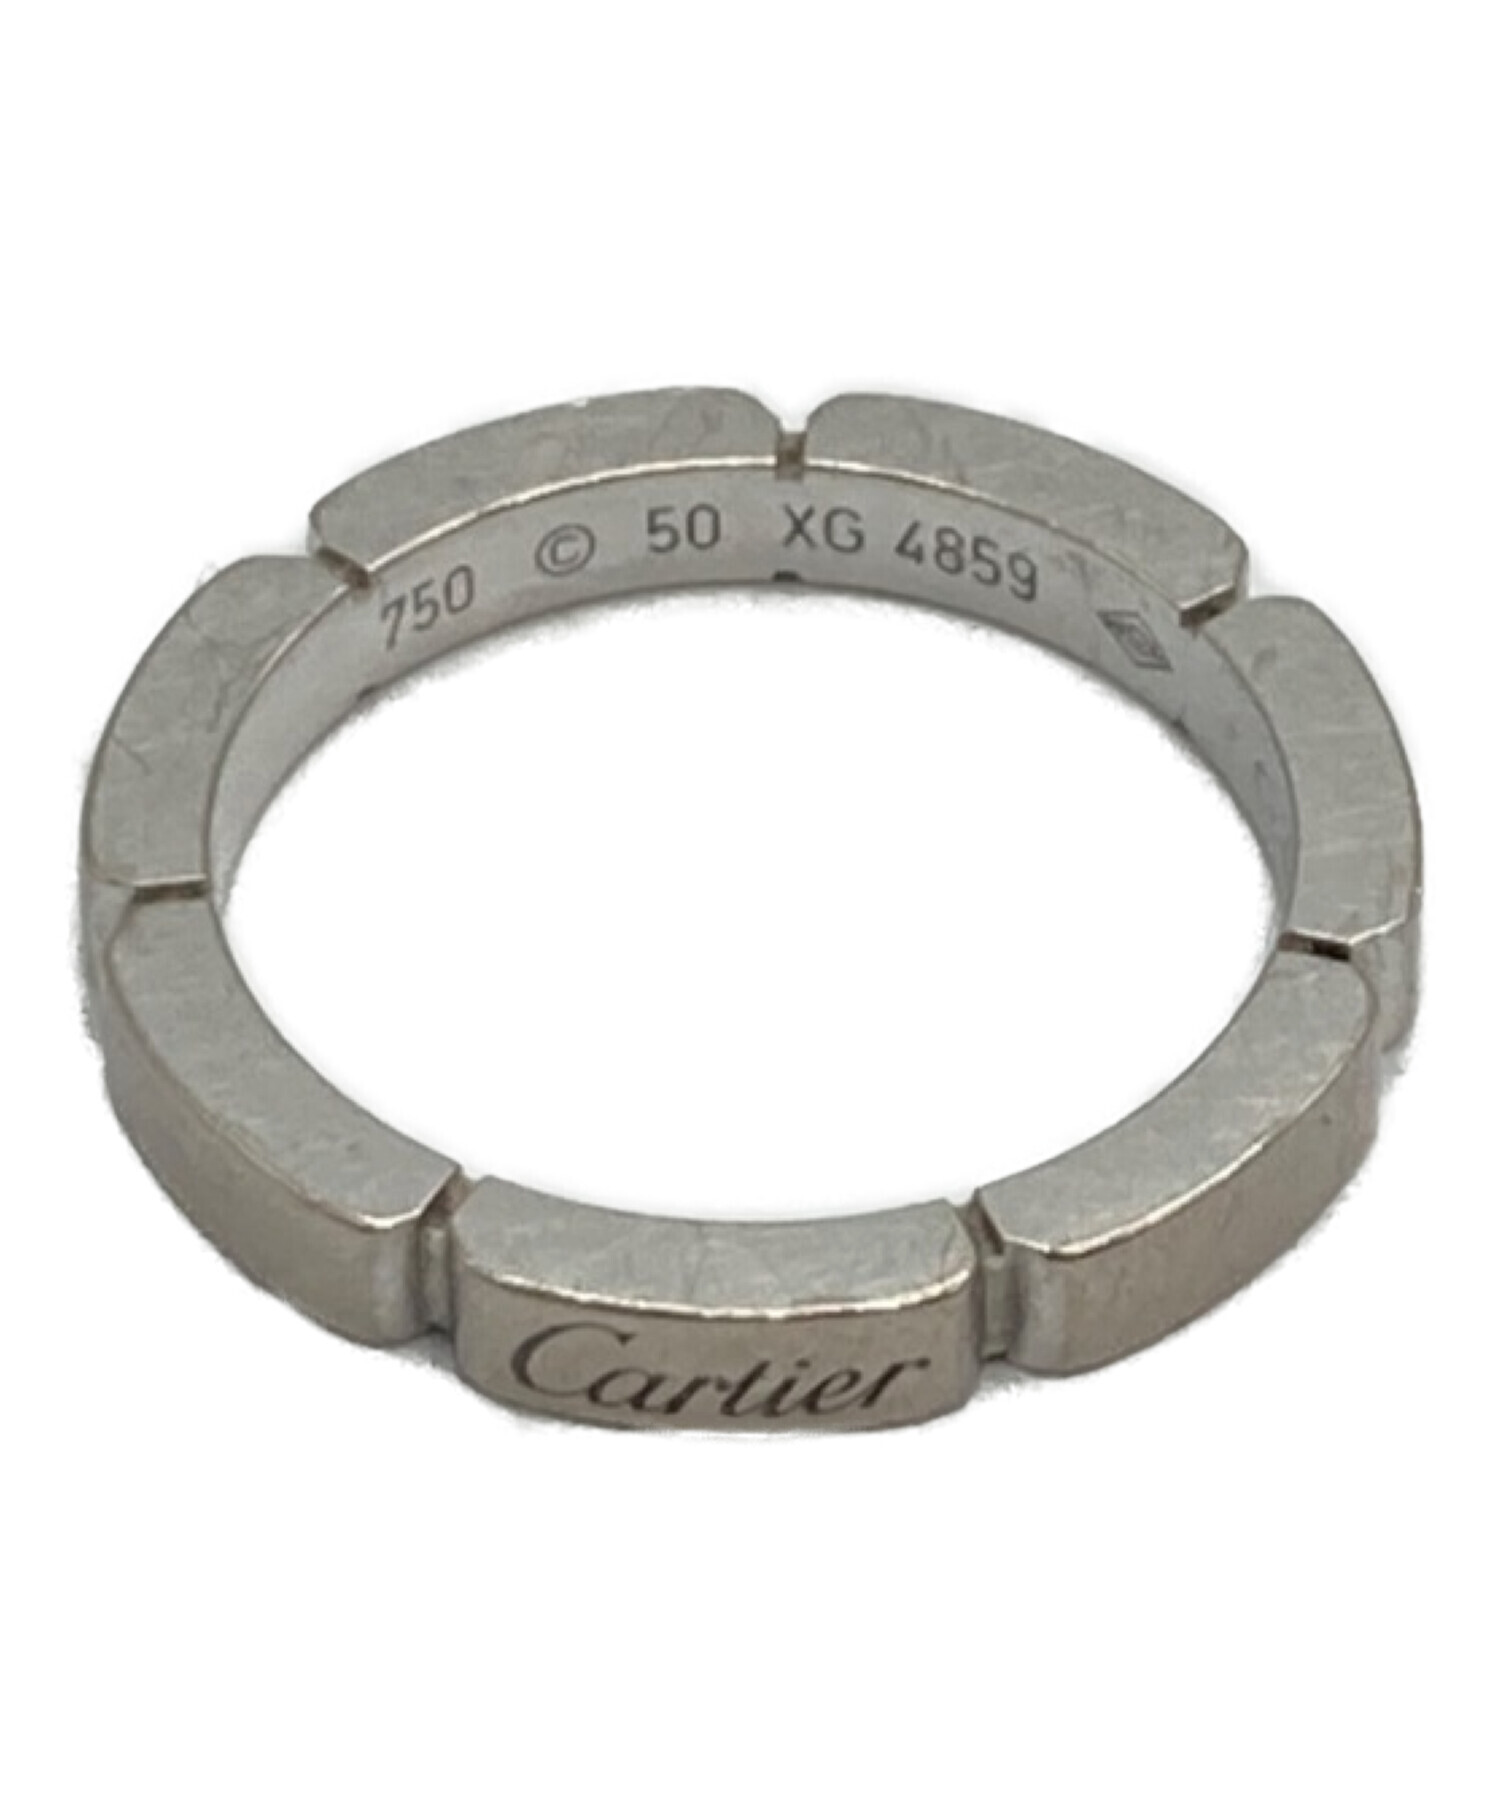 Cartier (カルティエ) リングMAILLON PANTHERE WEDDING BAND サイズ:10号